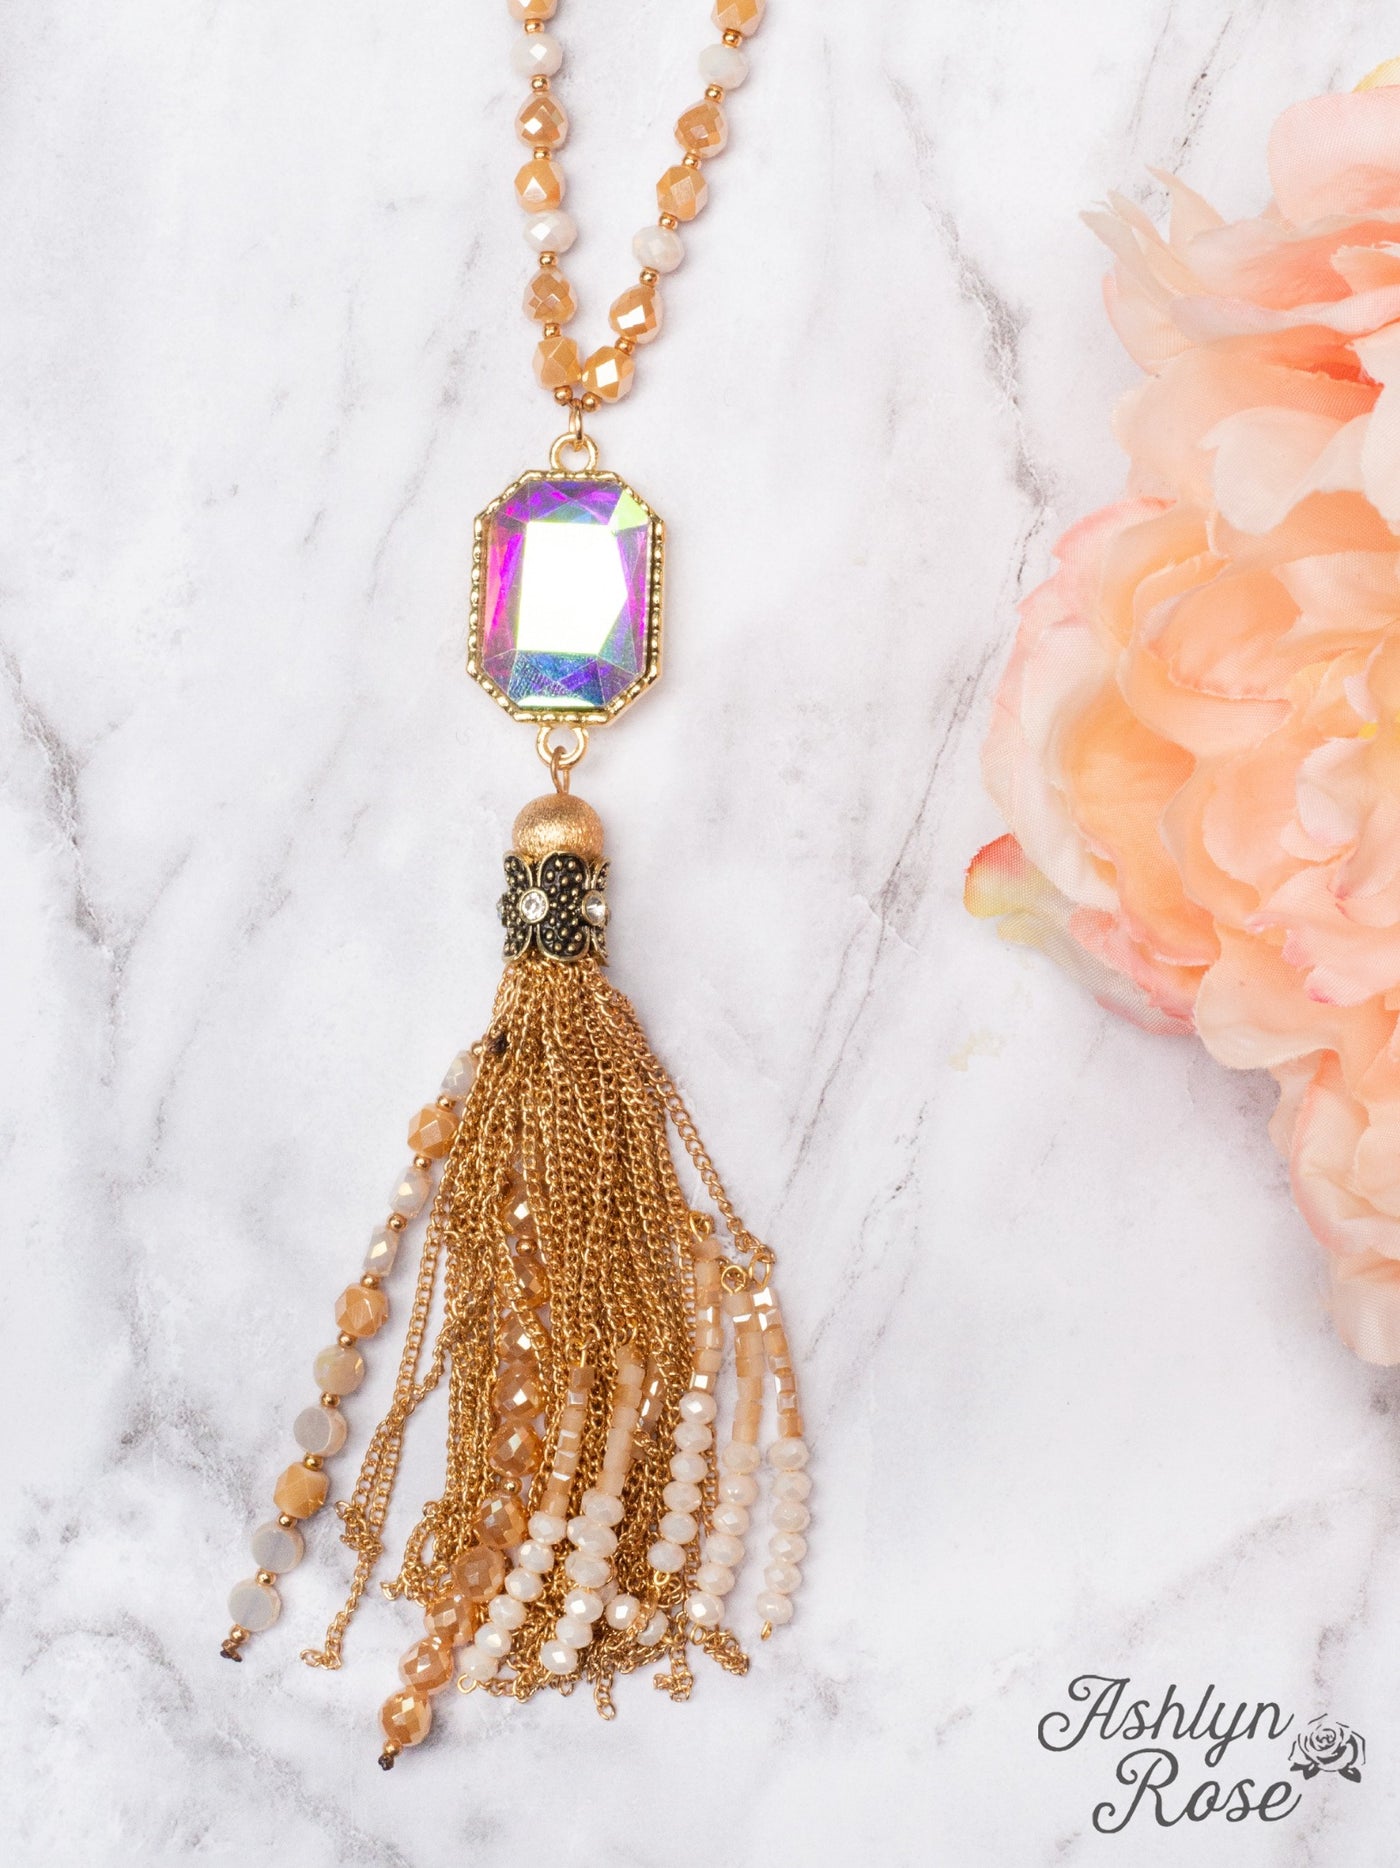 WATCH THE SUNSET WITH ME IRIDESCENT PENDANT WITH GOLD CHAIN TASSELS ON A MIXED CRYSTAL BEADED NECKLACE, WHITE